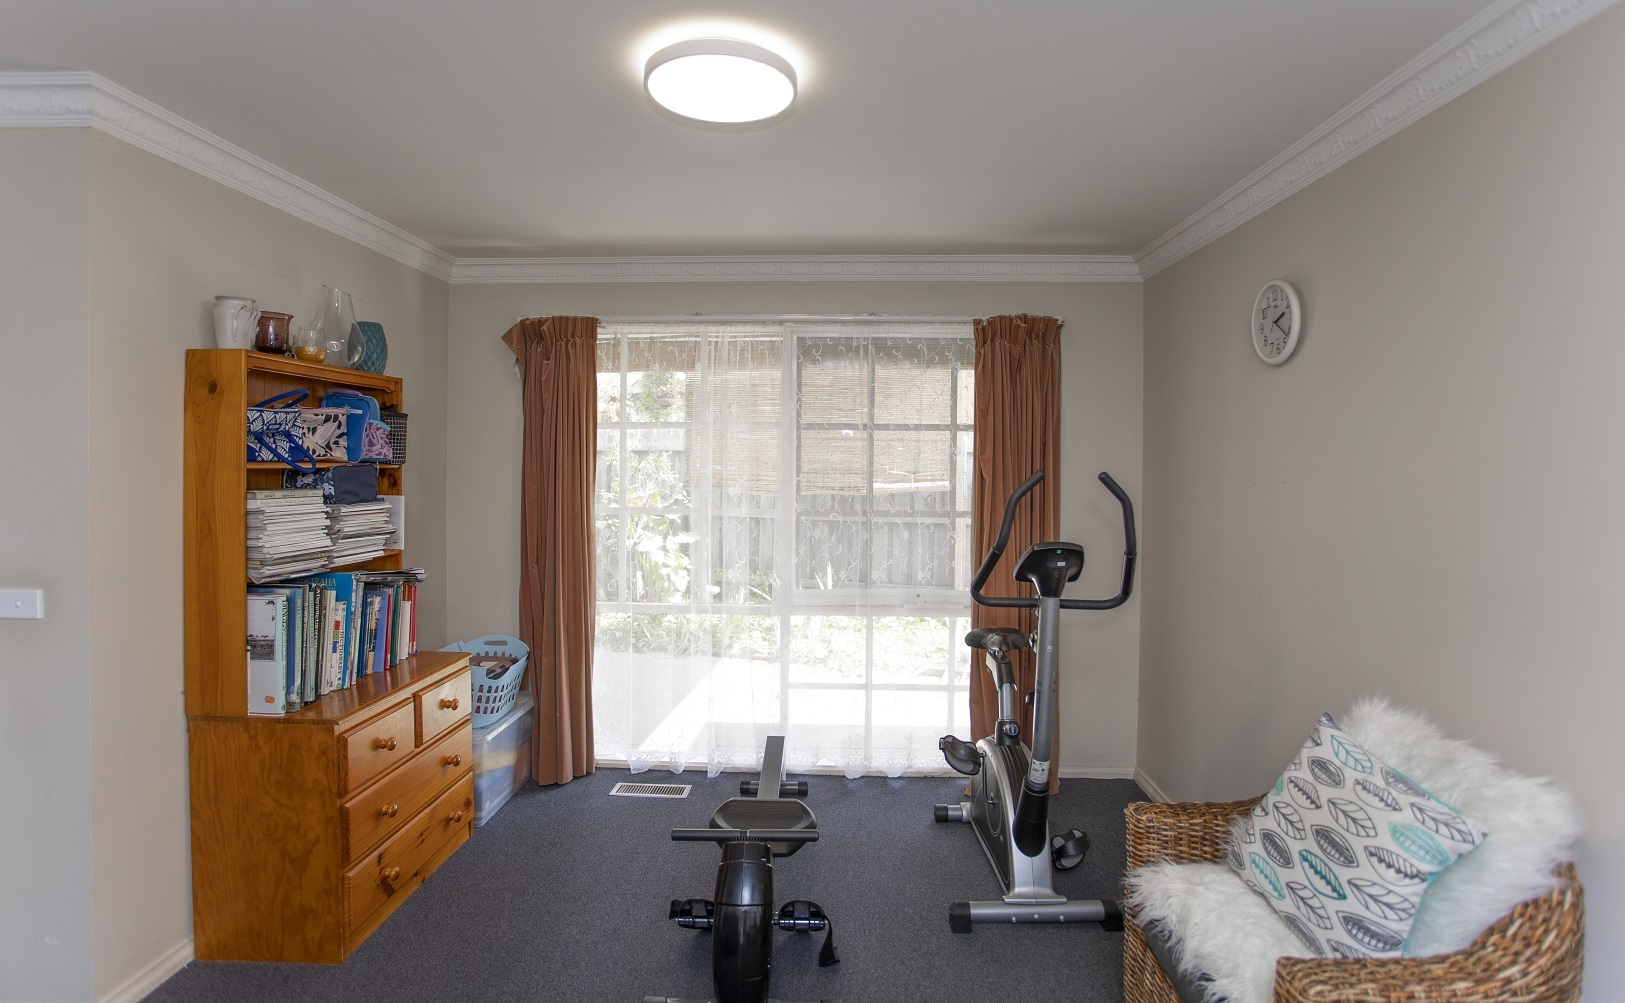 Living space that has an exercise bike and a bookshelf and large window